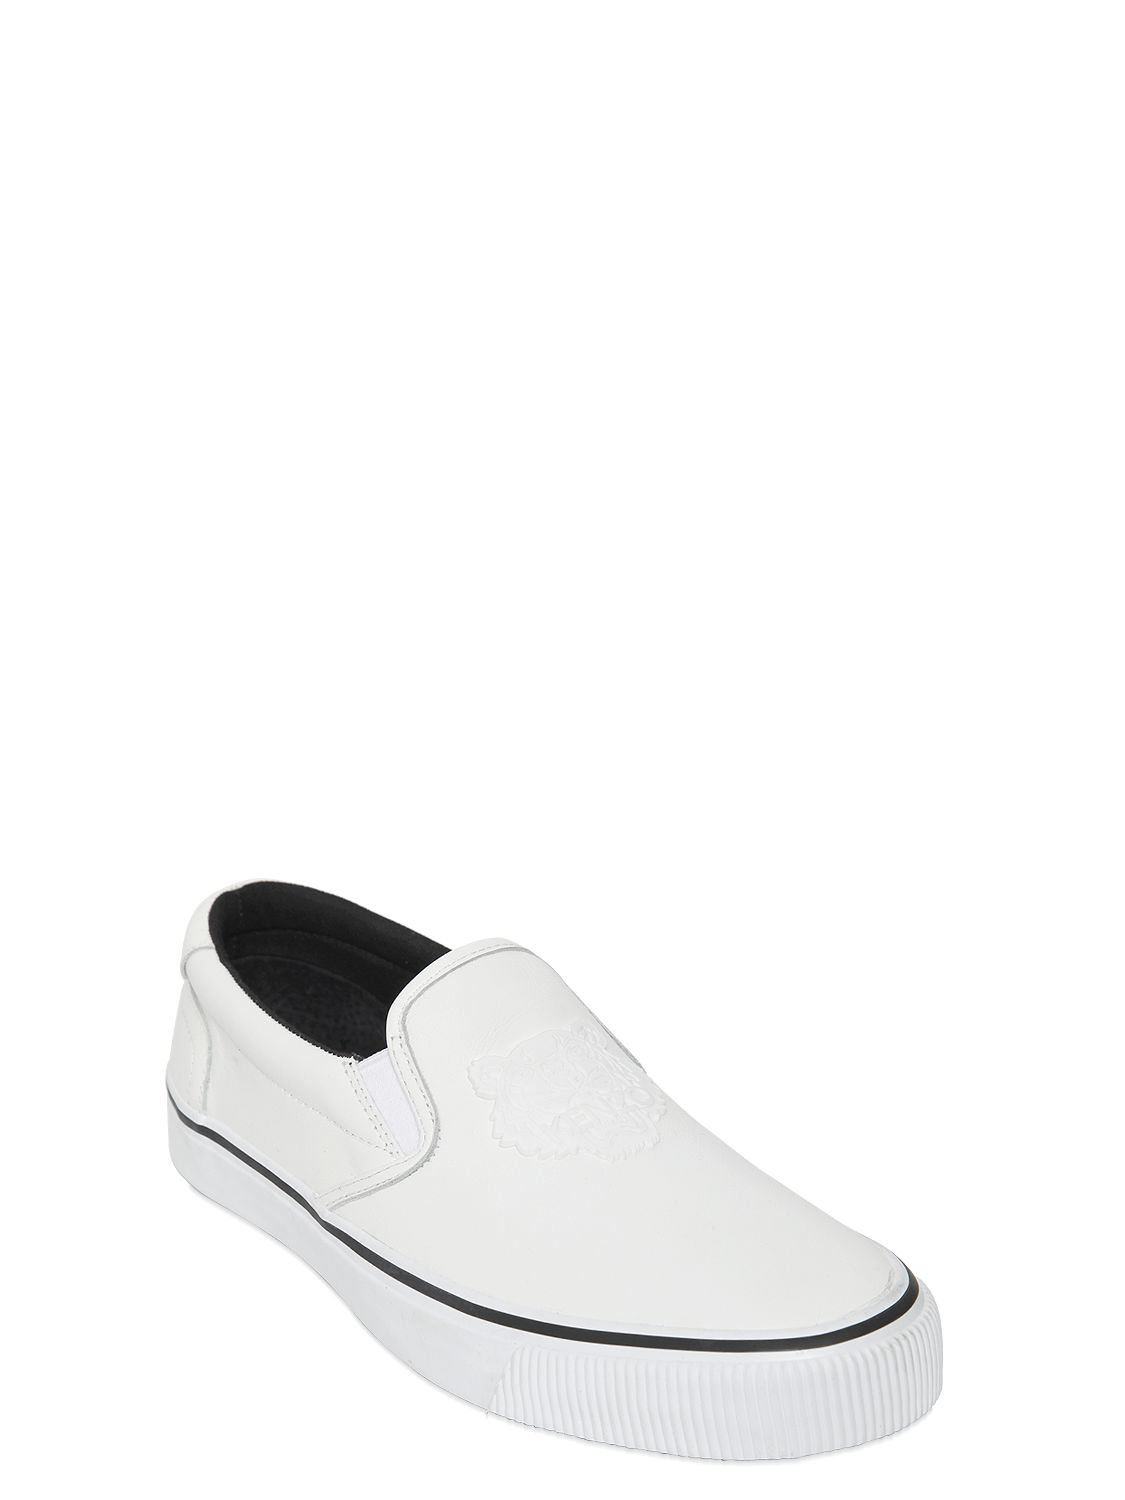 Kenzo Tiger Leather Slip-on Sneakers in White for Men | Lyst